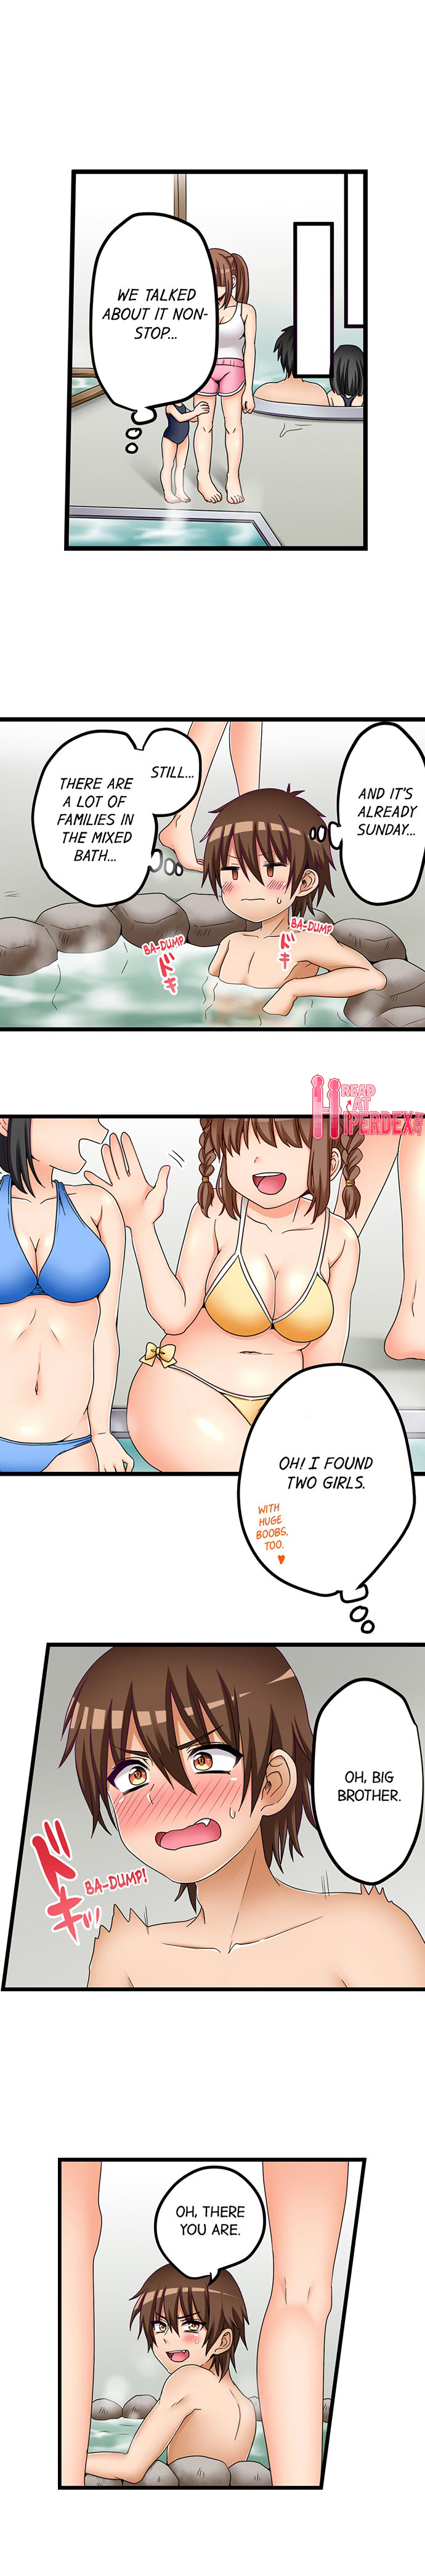 Taking a Hot Tanned Chick’s Virginity - Chapter 16 Page 4